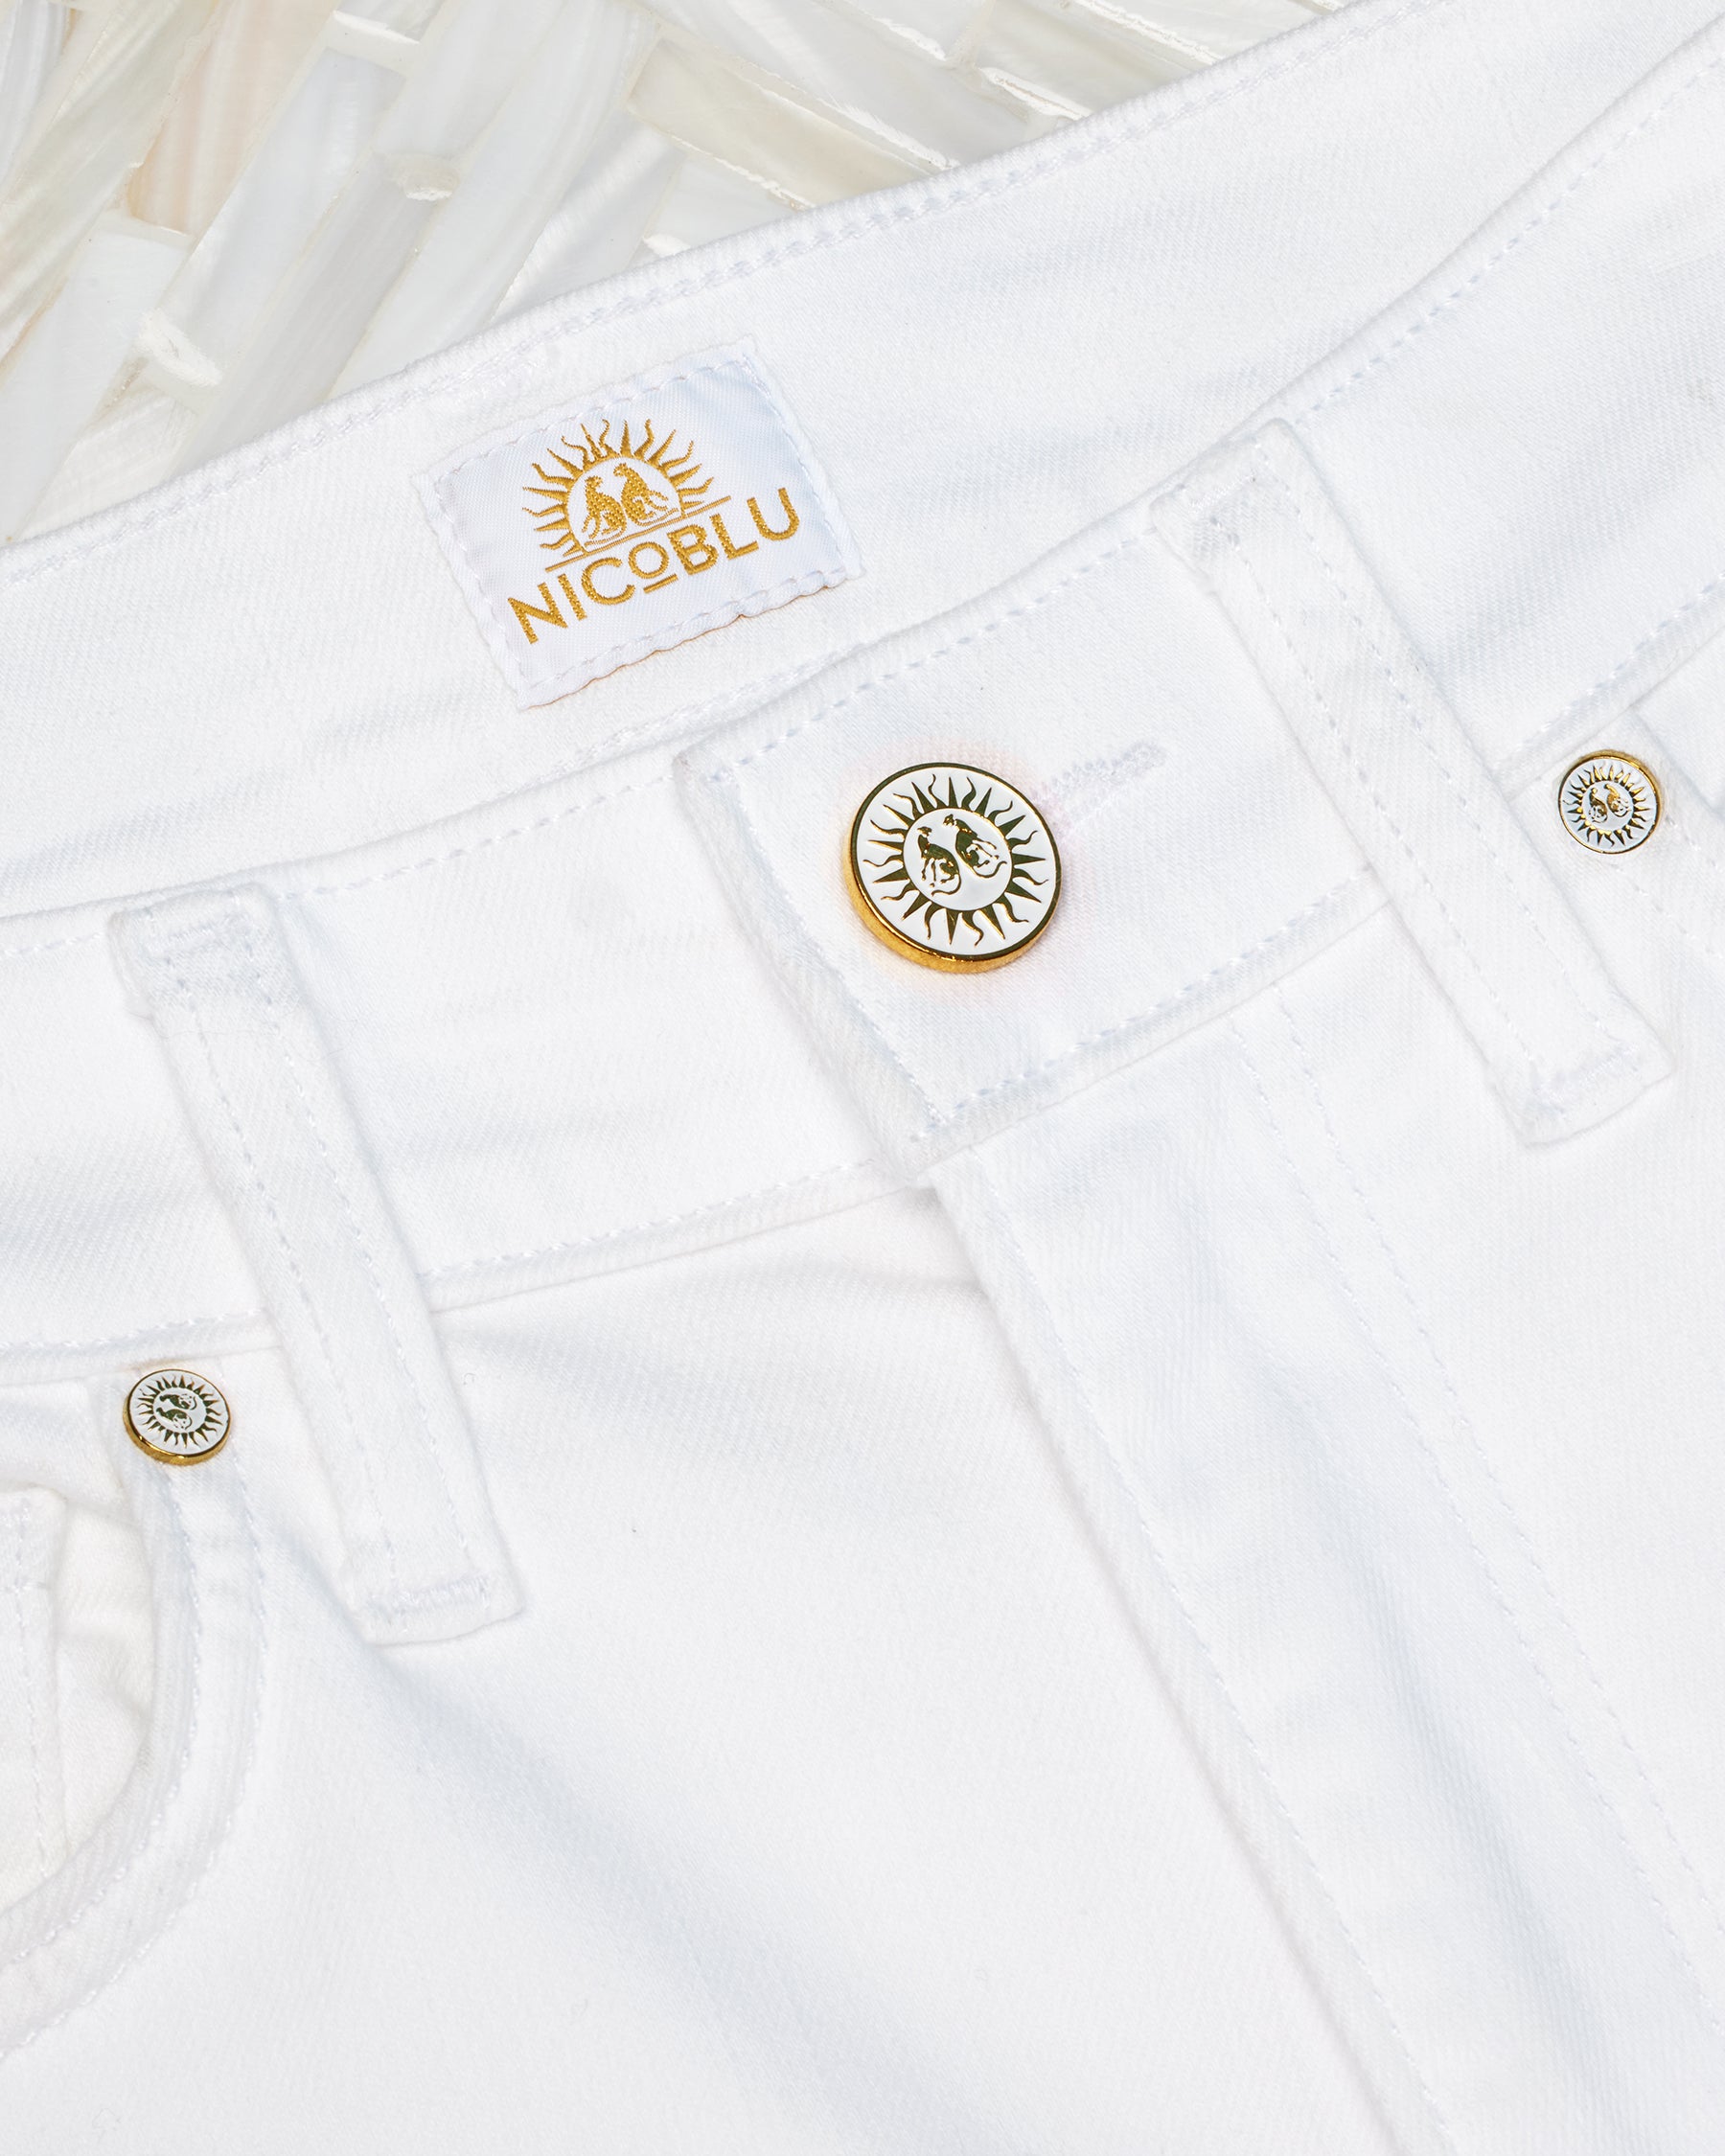 Details showing the wide belt loops and NicoBlu button closure and grommets of theKatherine Slim White Jean